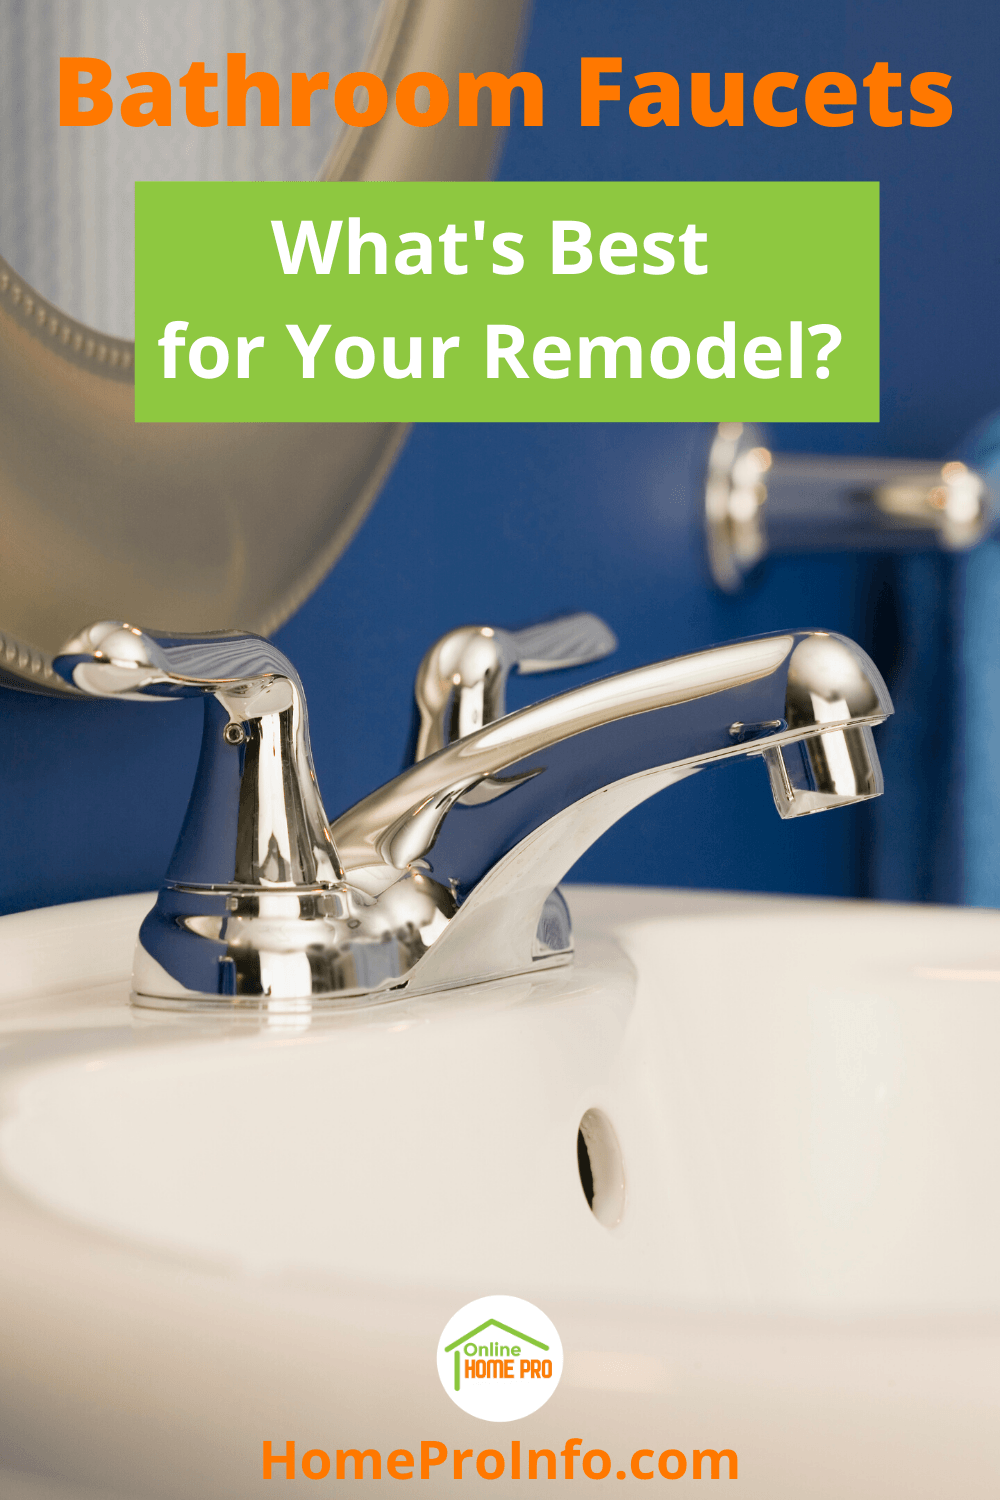 bathroom faucets and remodeling